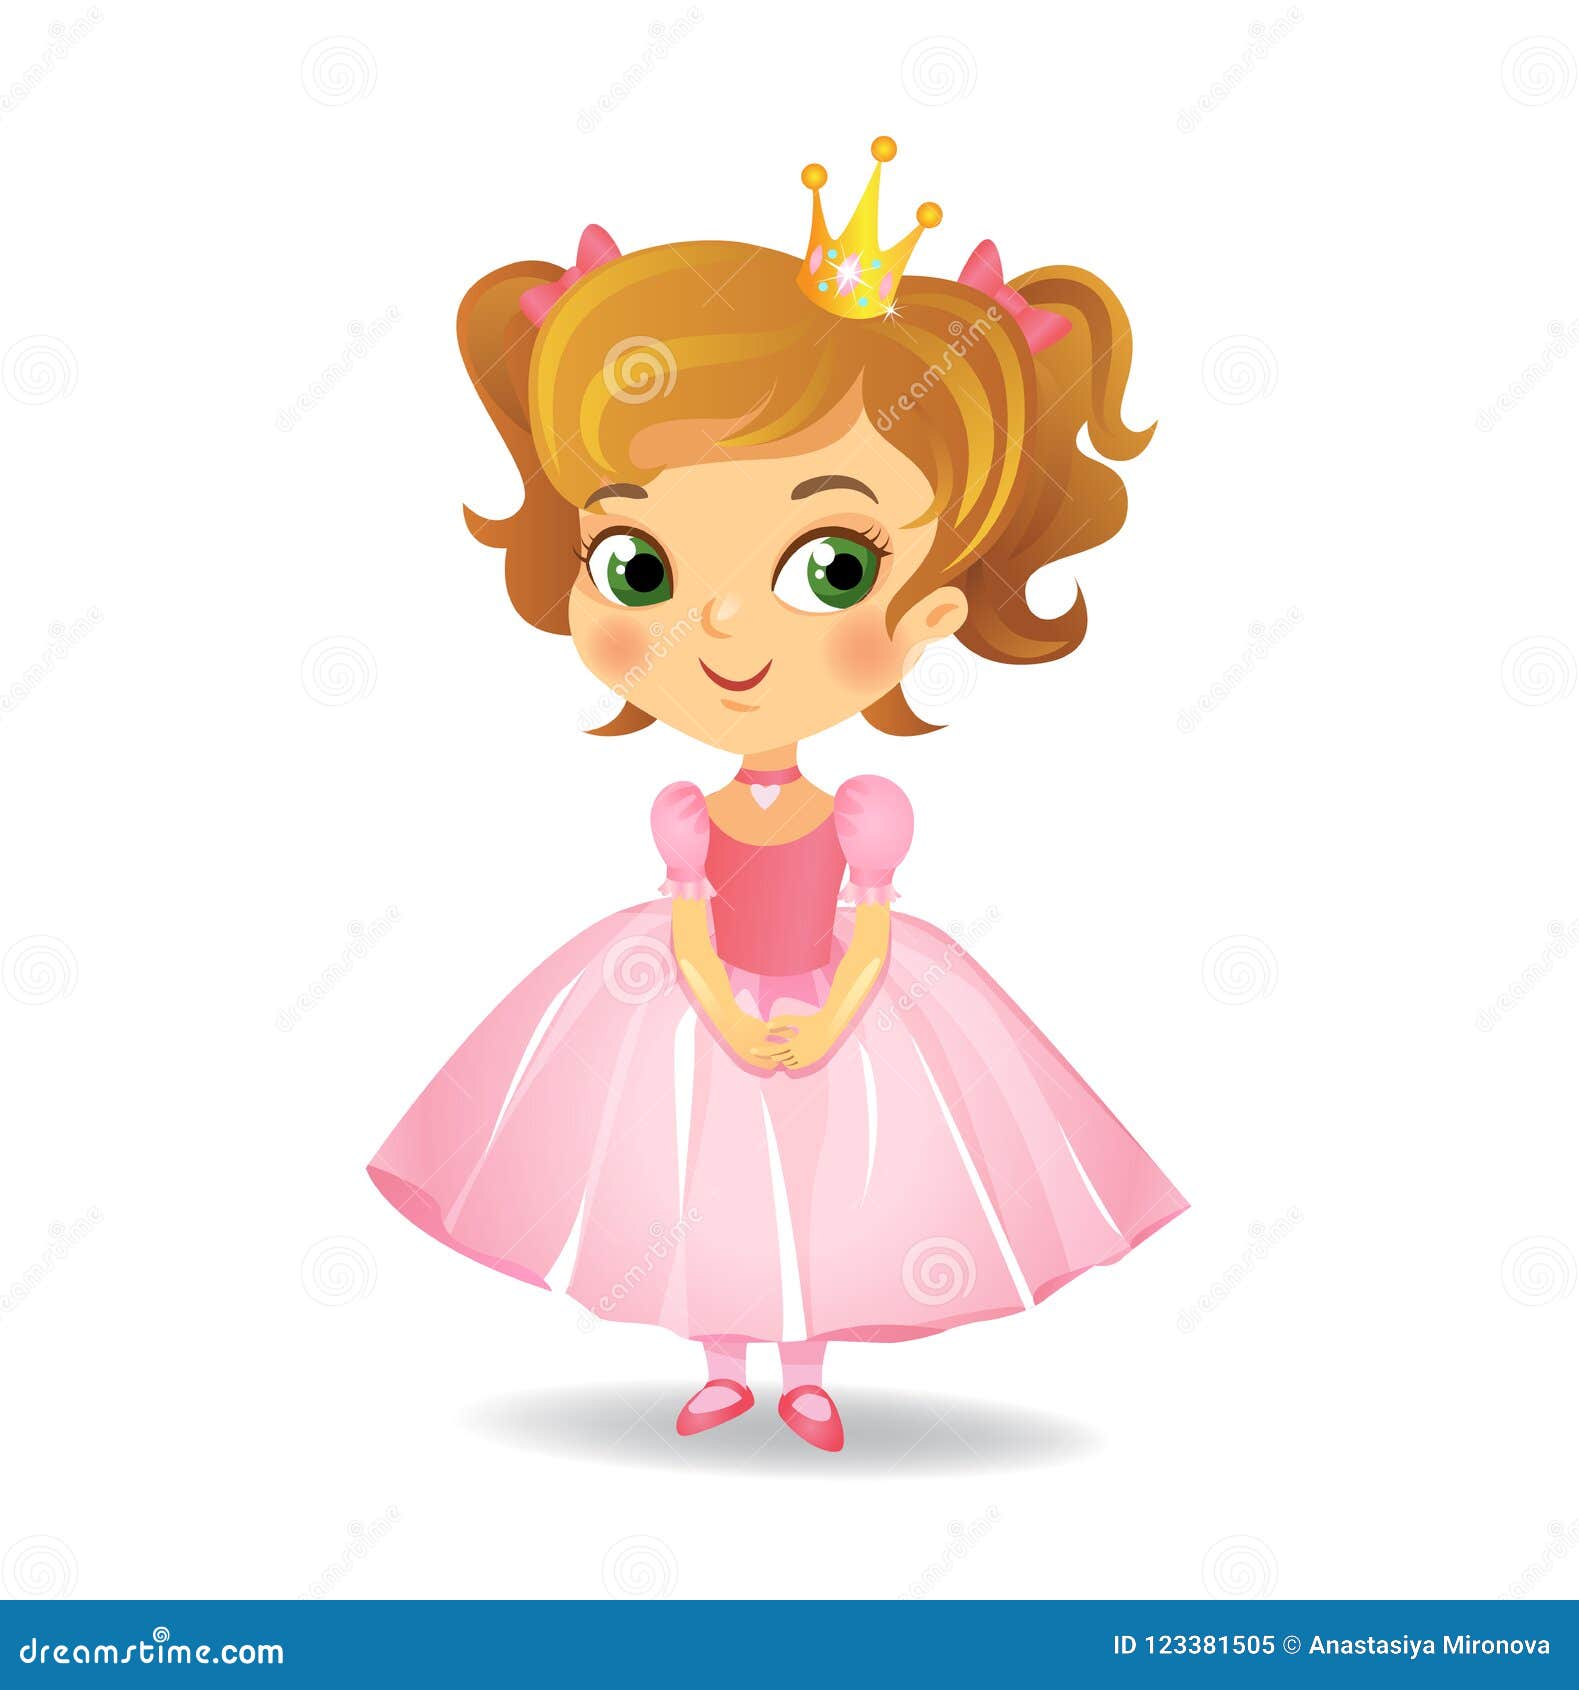 Cute little princess stock vector. Illustration of characters - 123381505